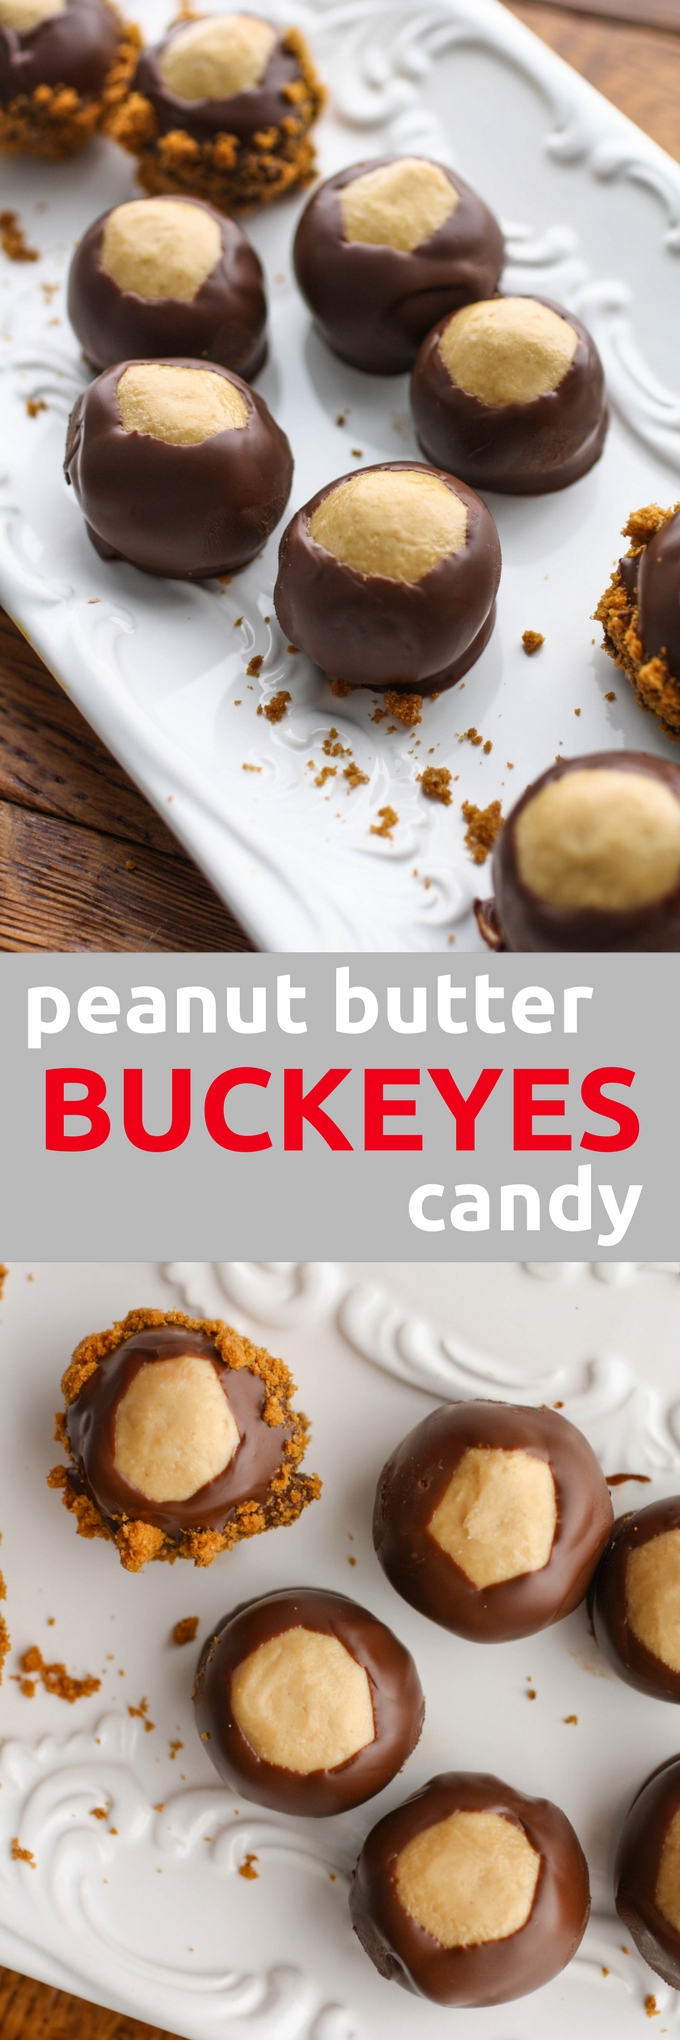 Peanut Butter Buckeyes Candy make a fabulous and tasty treat! You'll love buckeyes candy!